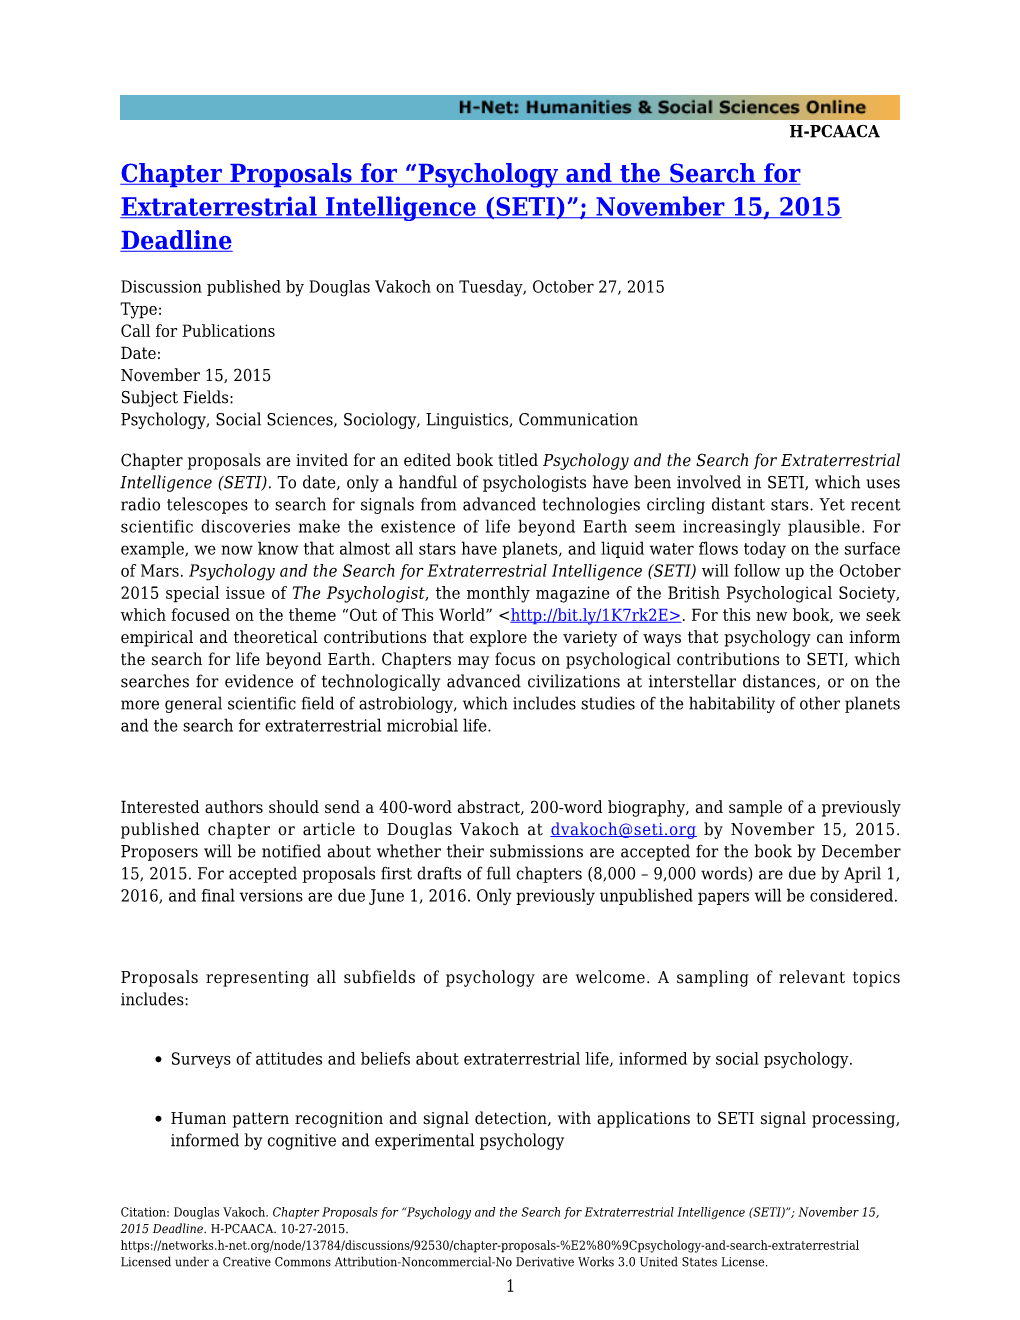 Psychology and the Search for Extraterrestrial Intelligence (SETI)”; November 15, 2015 Deadline